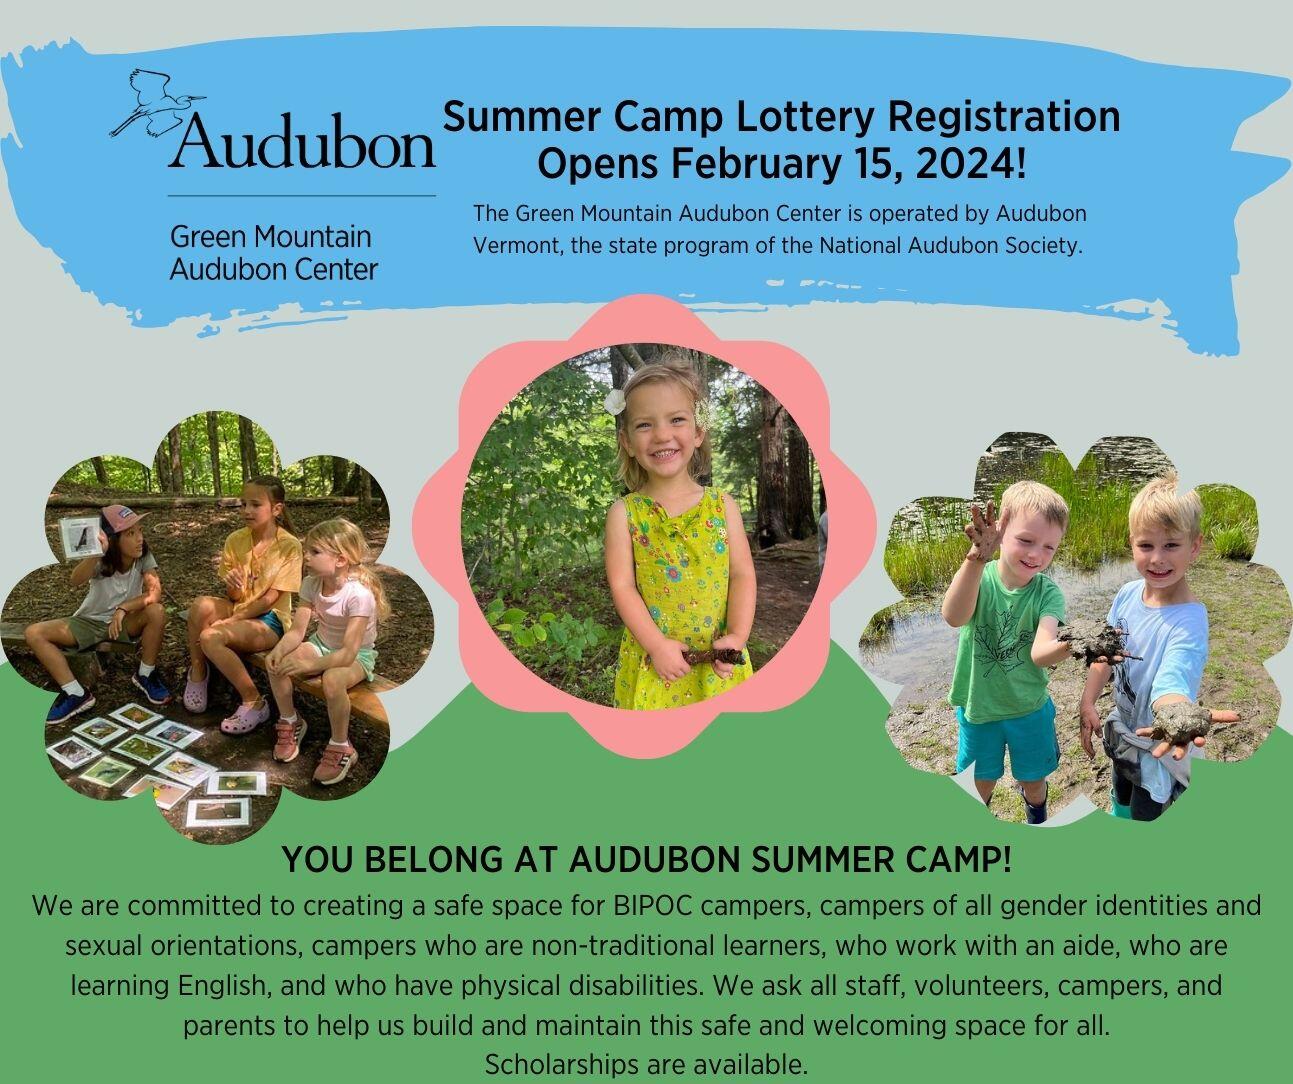 Coloful backgrounds of blue and green highlight text with registration date and statement of bleonging with 3 colorful pictures of campers